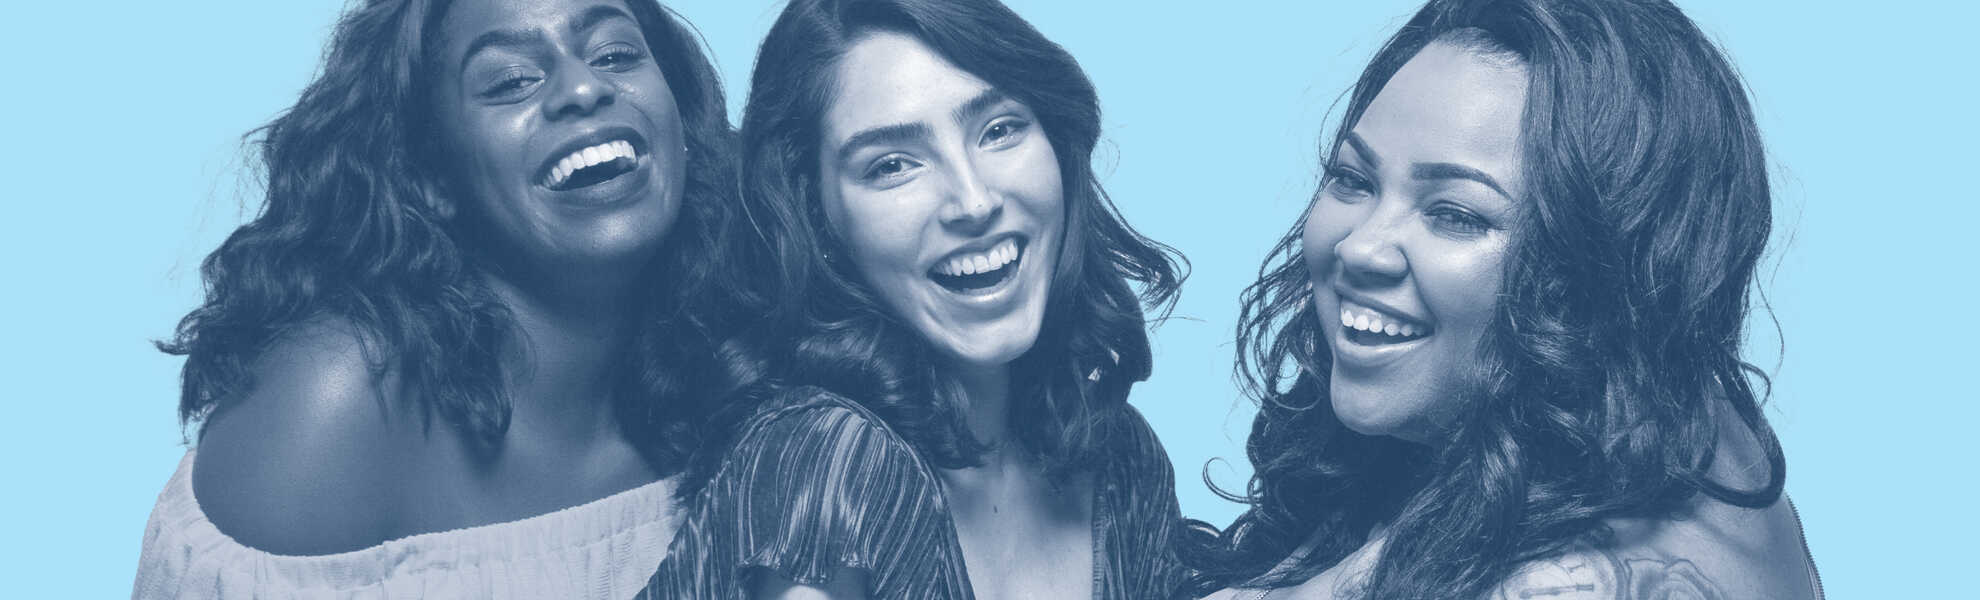 Three women images in a light blue background